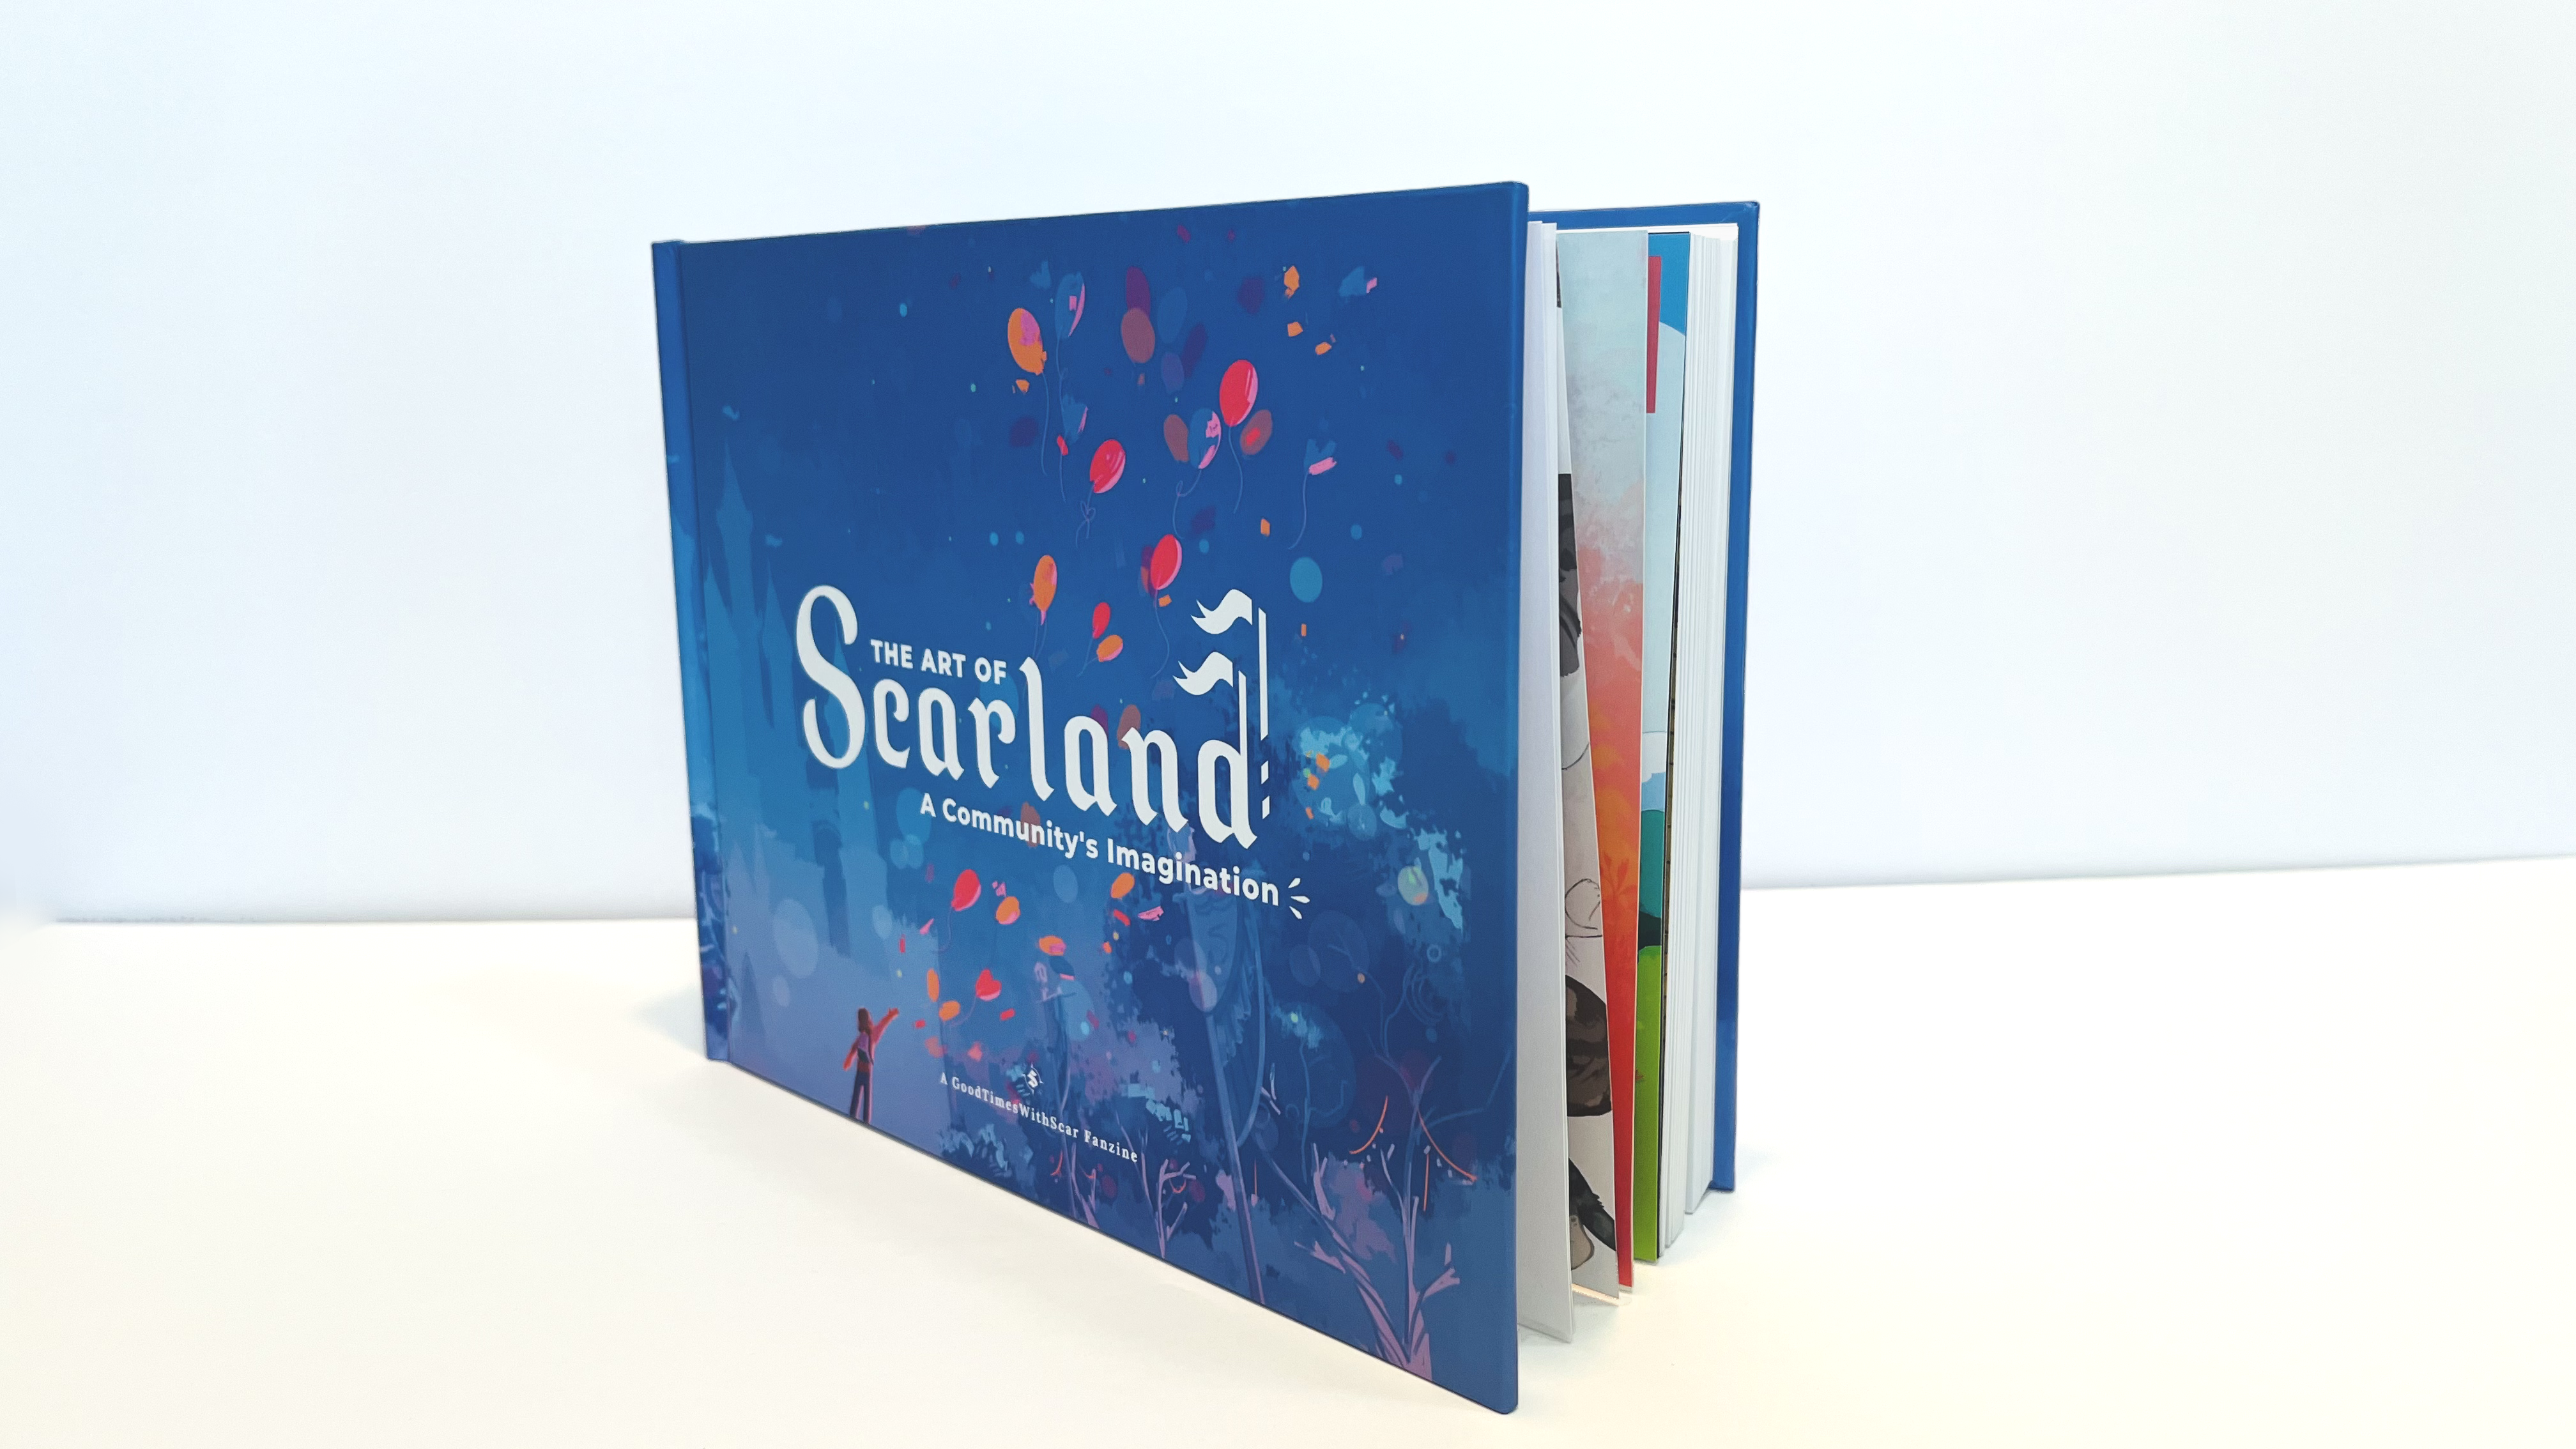 The Scarland Artbook on a white surface with a white background. It is stood such that the front and the open side of the book can be seen. The edges of the pages are barely visible since the book is cracked open.